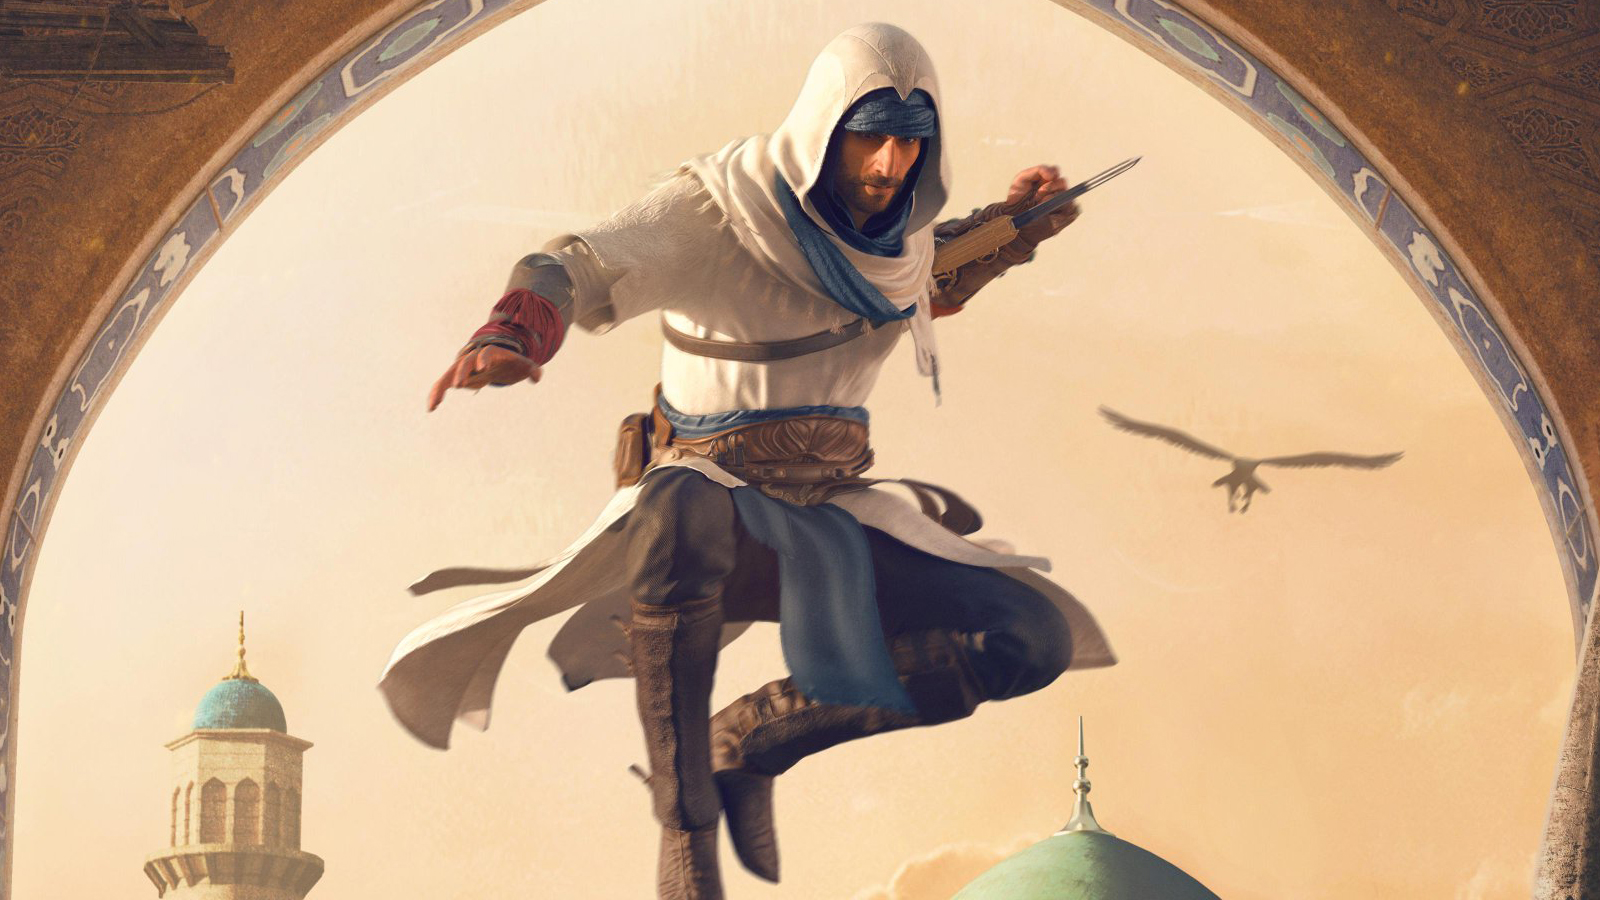 Assassin's Creed Codename Red - Leaks and Rumors Round-Up (Main